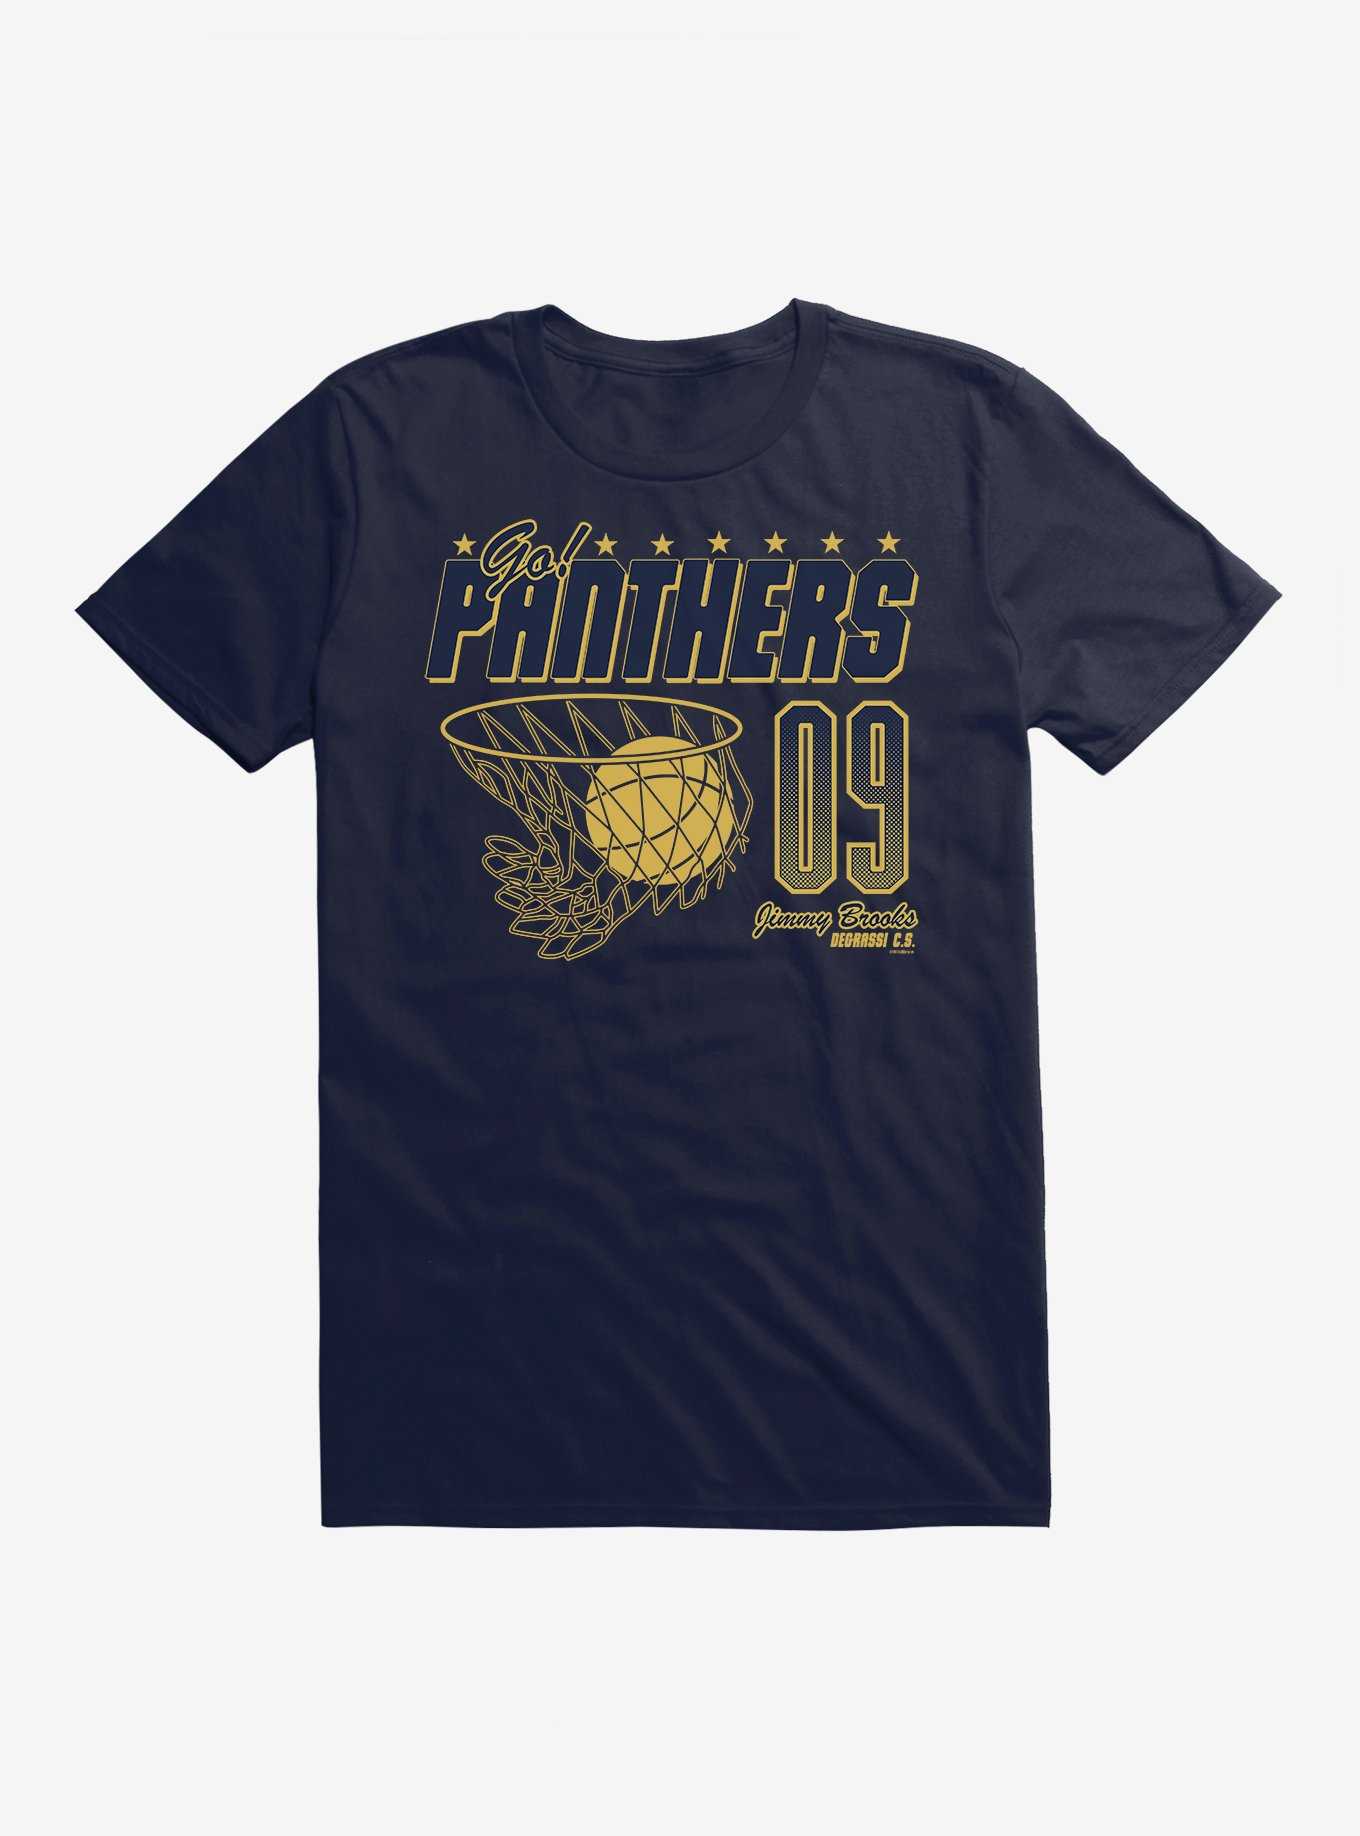 Degrassi: The Next Generation Go Panthers 09 Jimmy Brooks T-Shirt, , hi-res